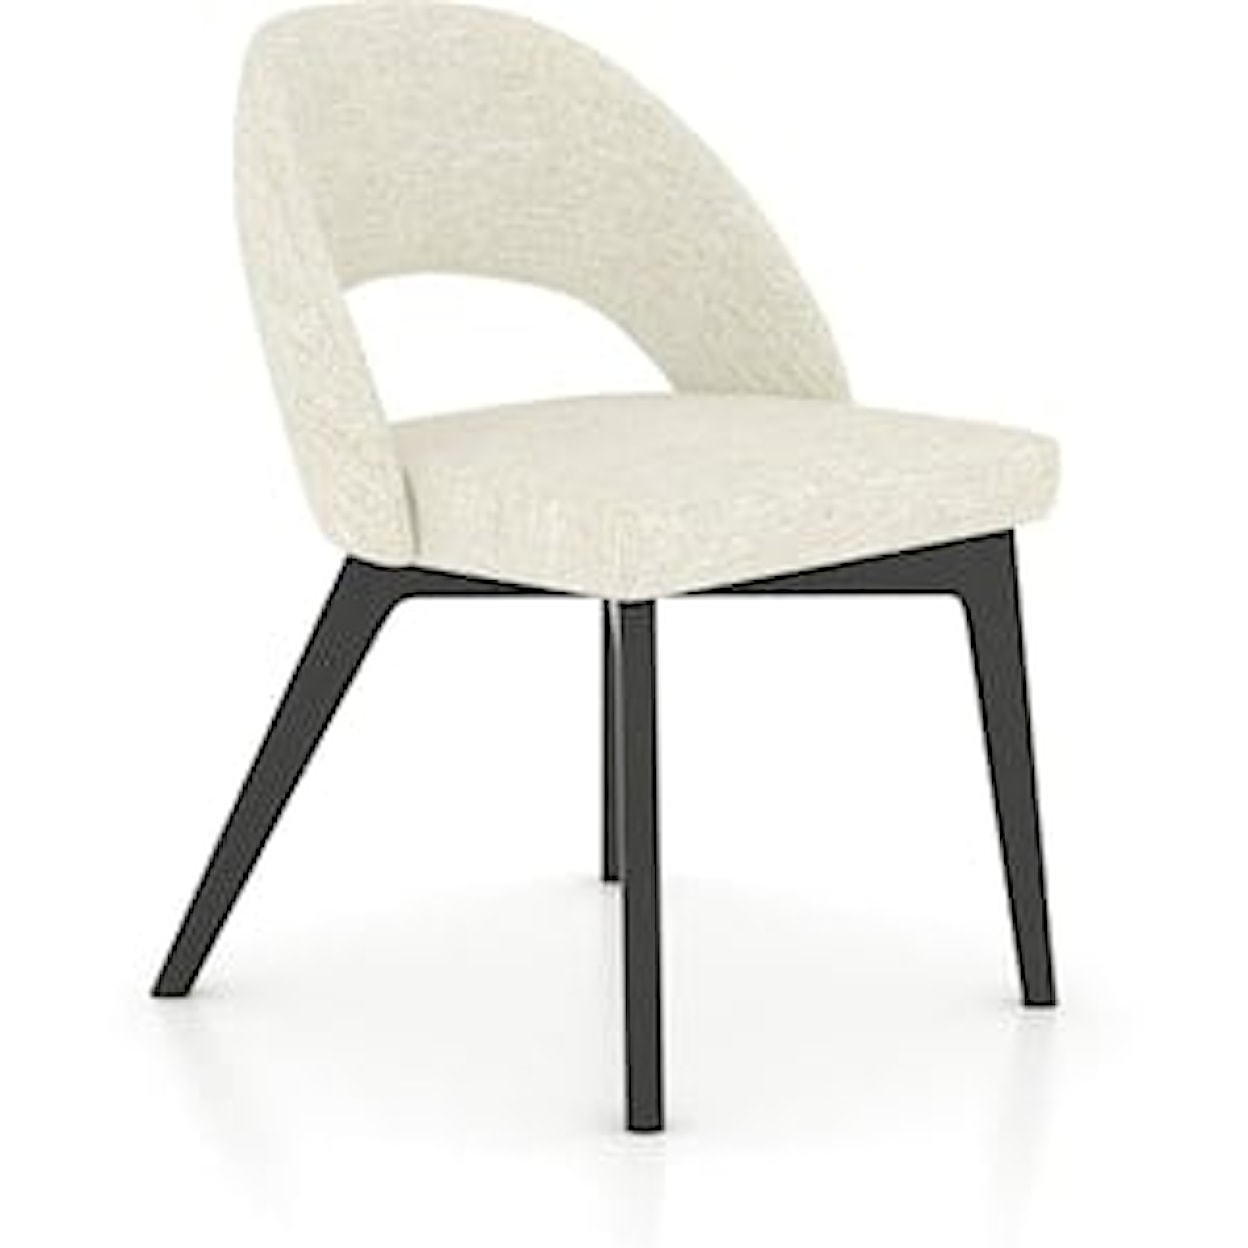 Canadel Downtown Upholstered Swivel Chair